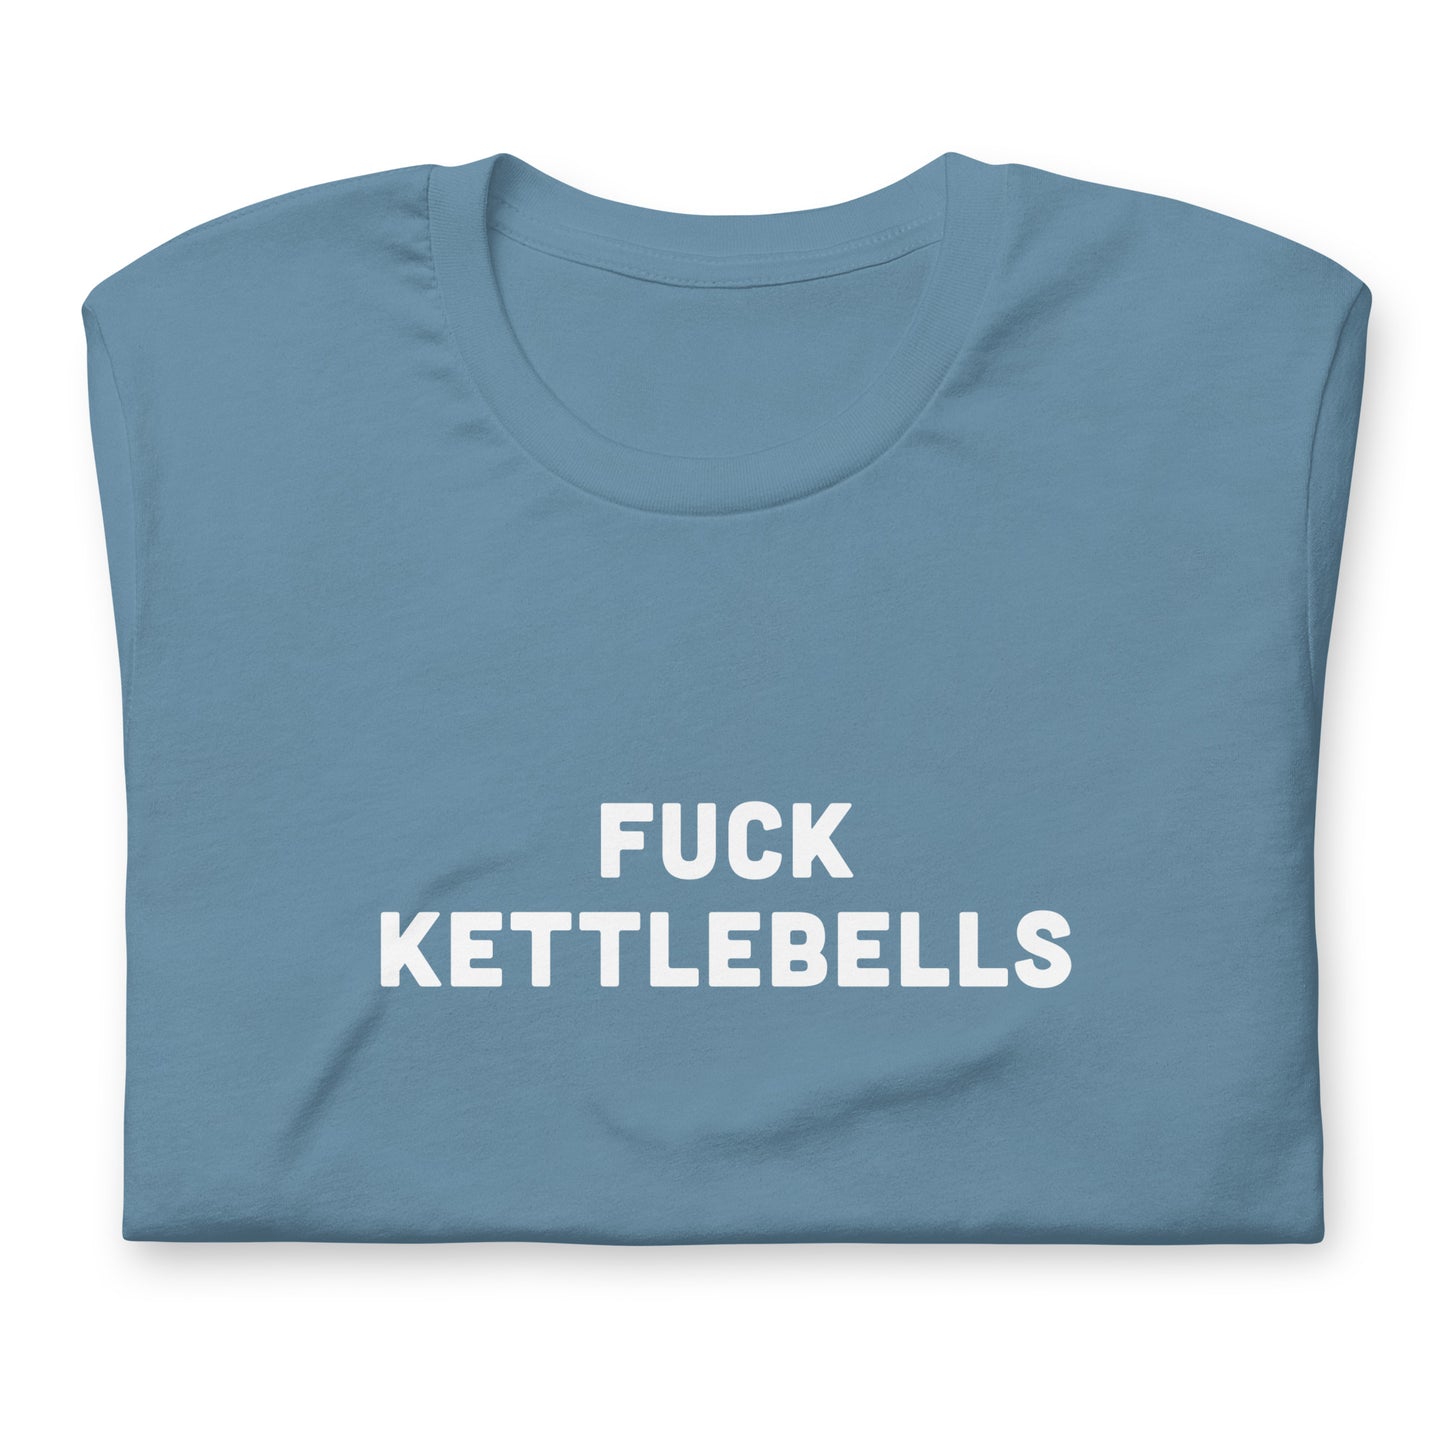 Fuck Kettlebells T-Shirt Size M Color Forest